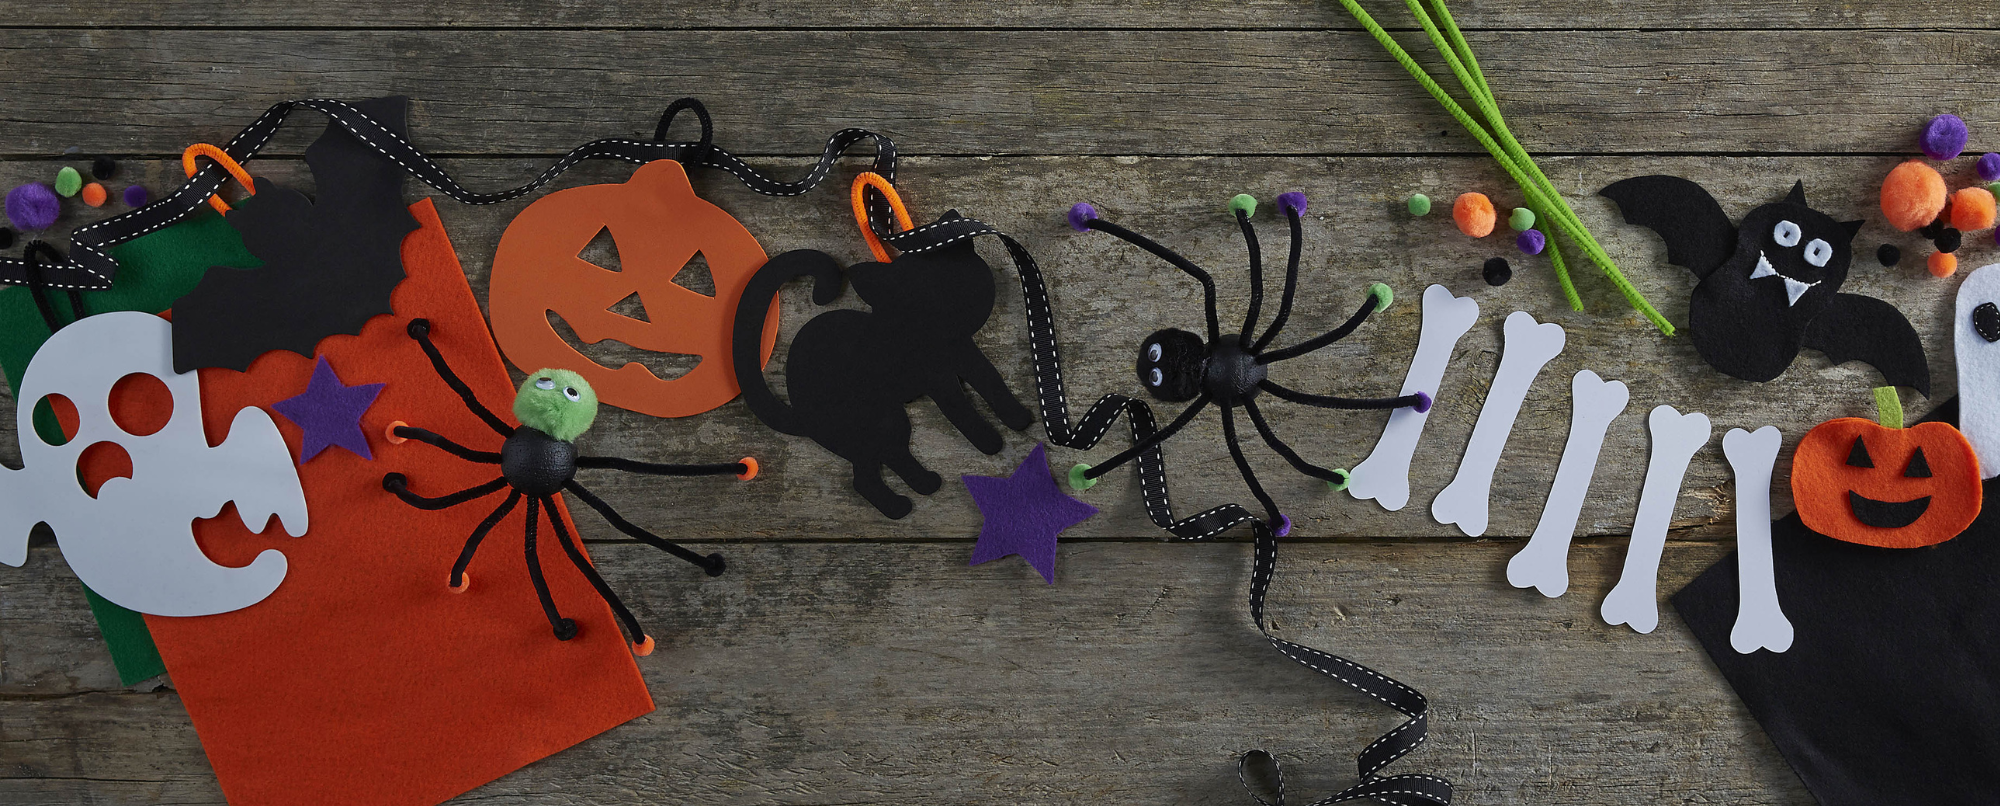 Join Us For Halloween: FREE Arts & Crafts